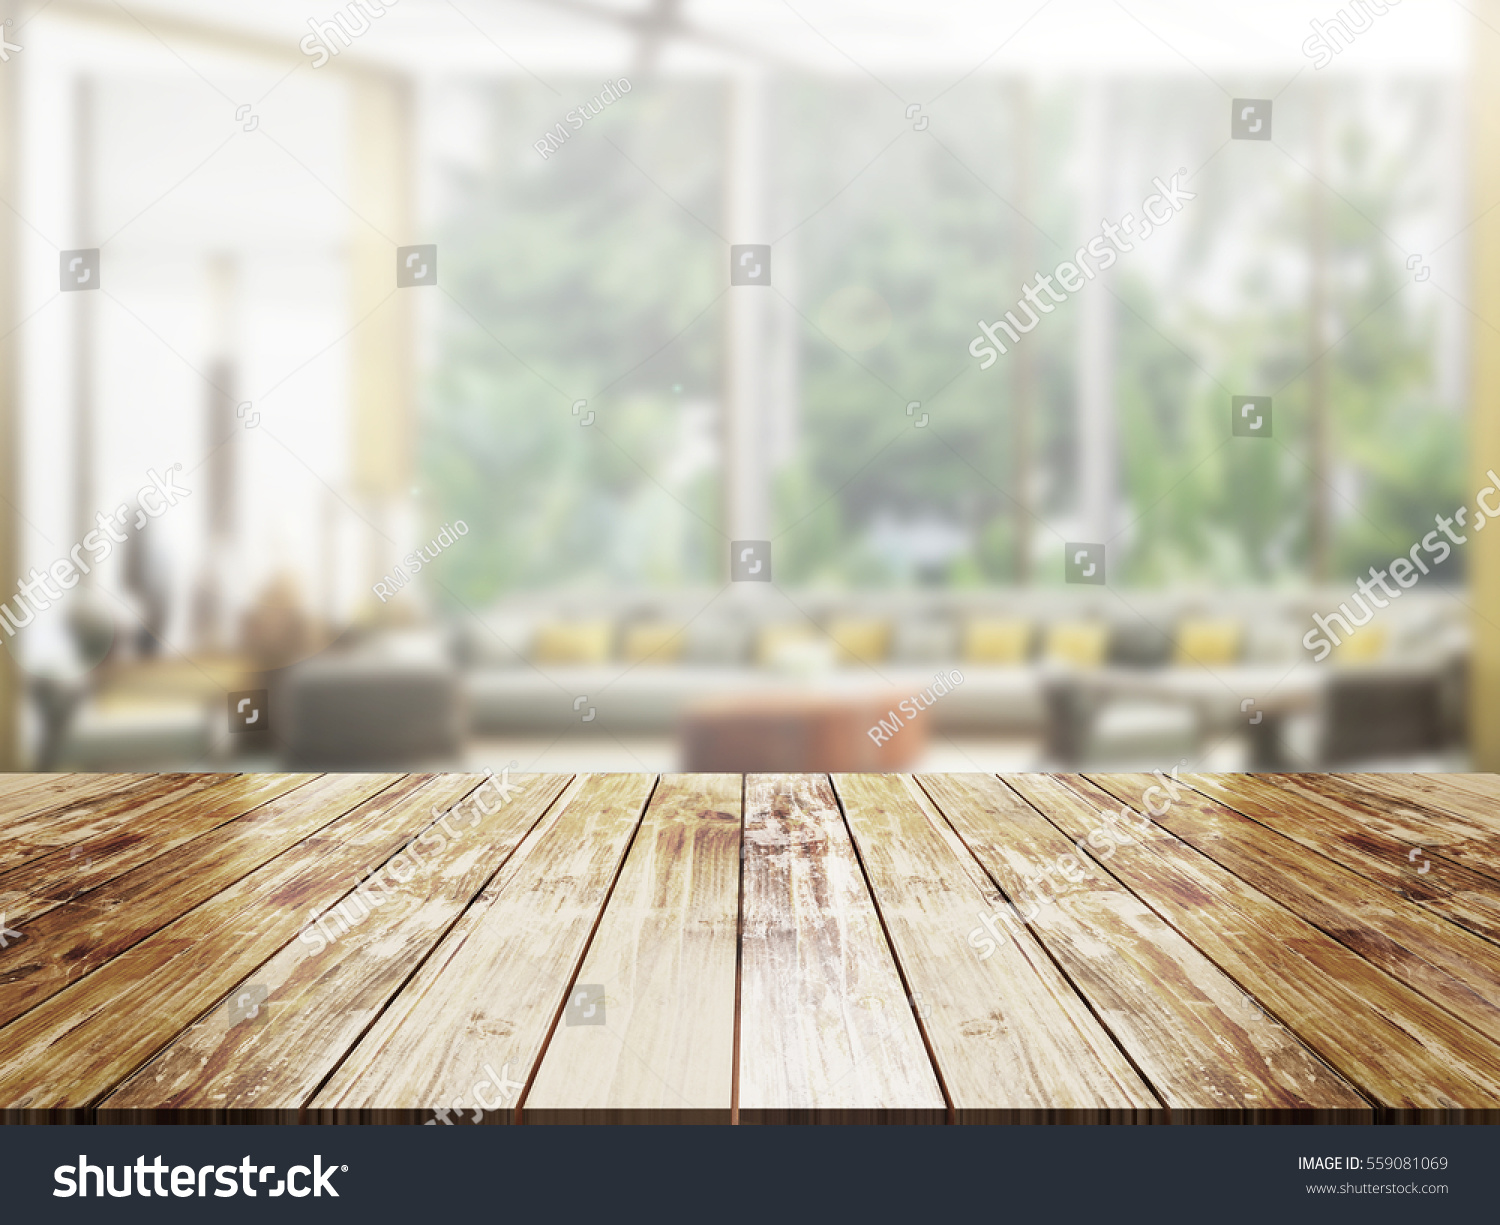 tax Or either Orchard Closeup Top Wood Table Blur Background Stock Photo 559081069 | Shutterstock